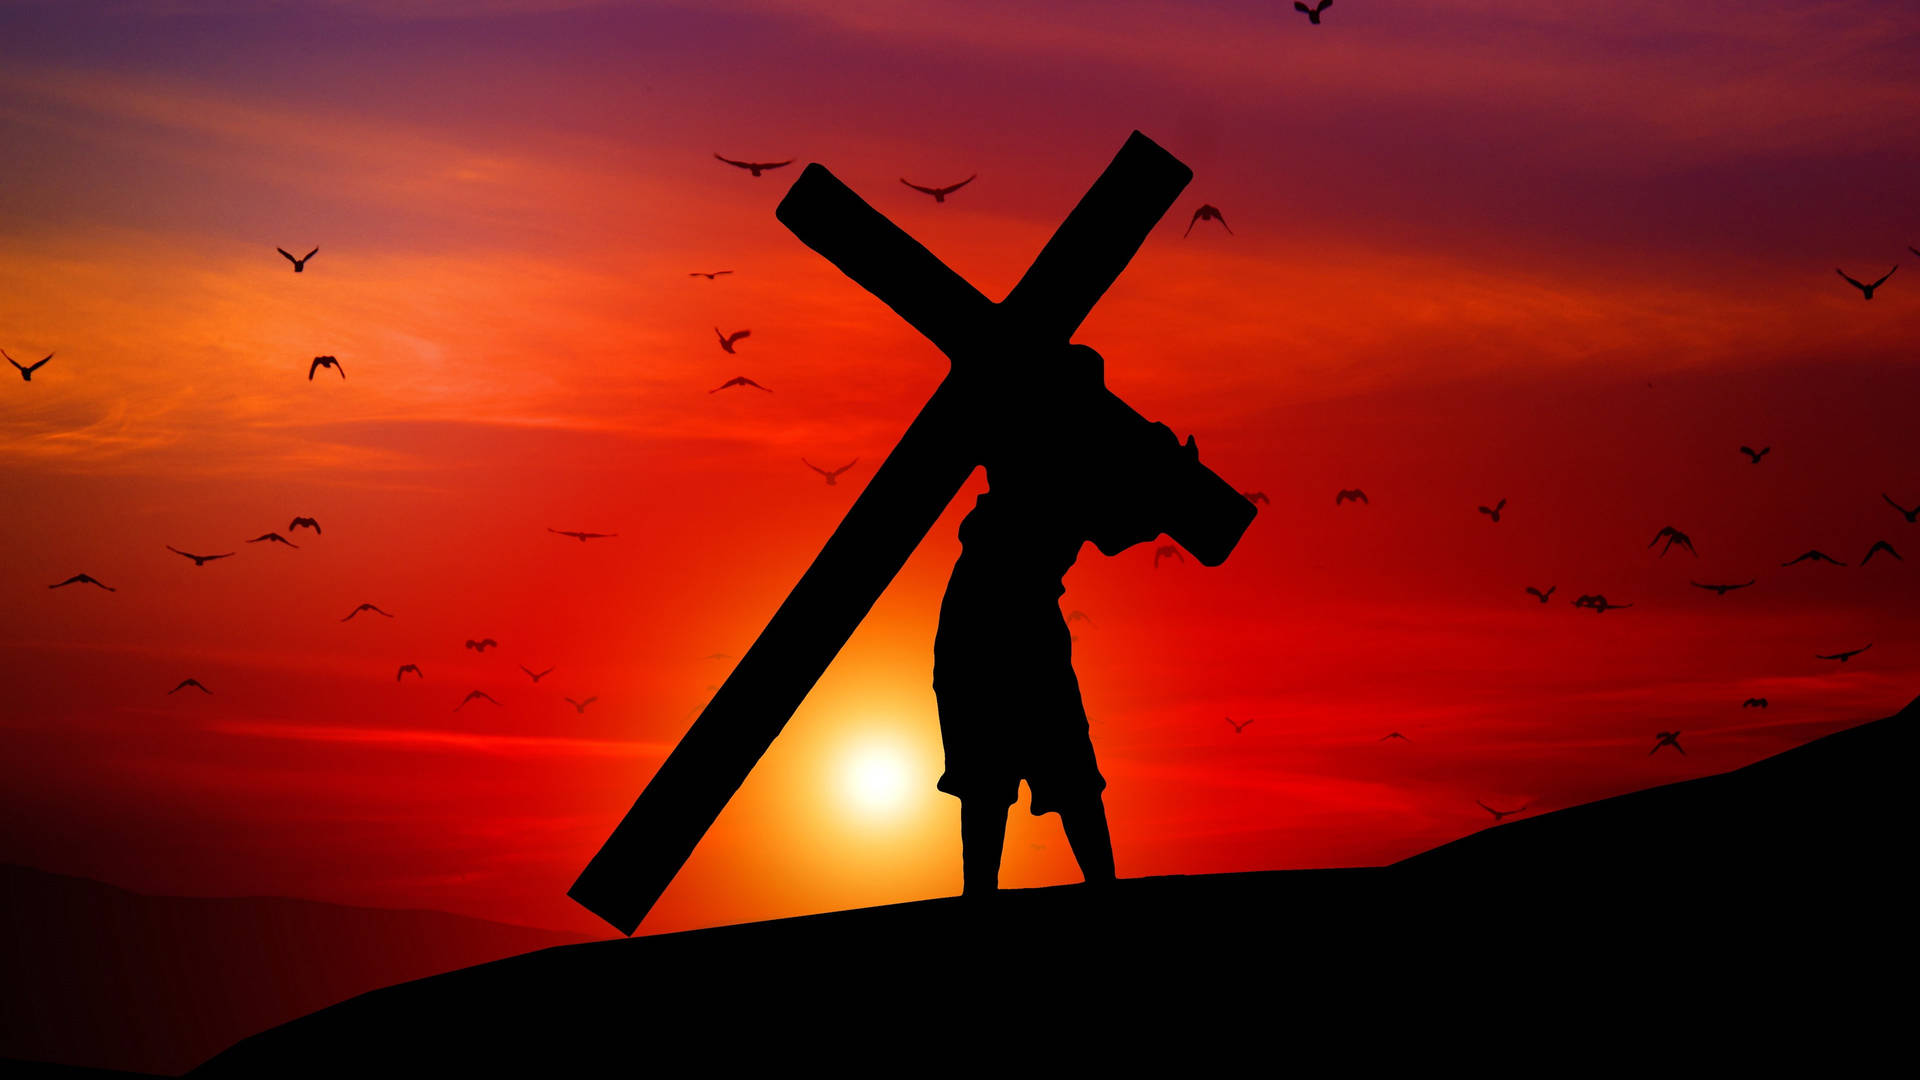 Jesus Christ Carrying A Cross Background